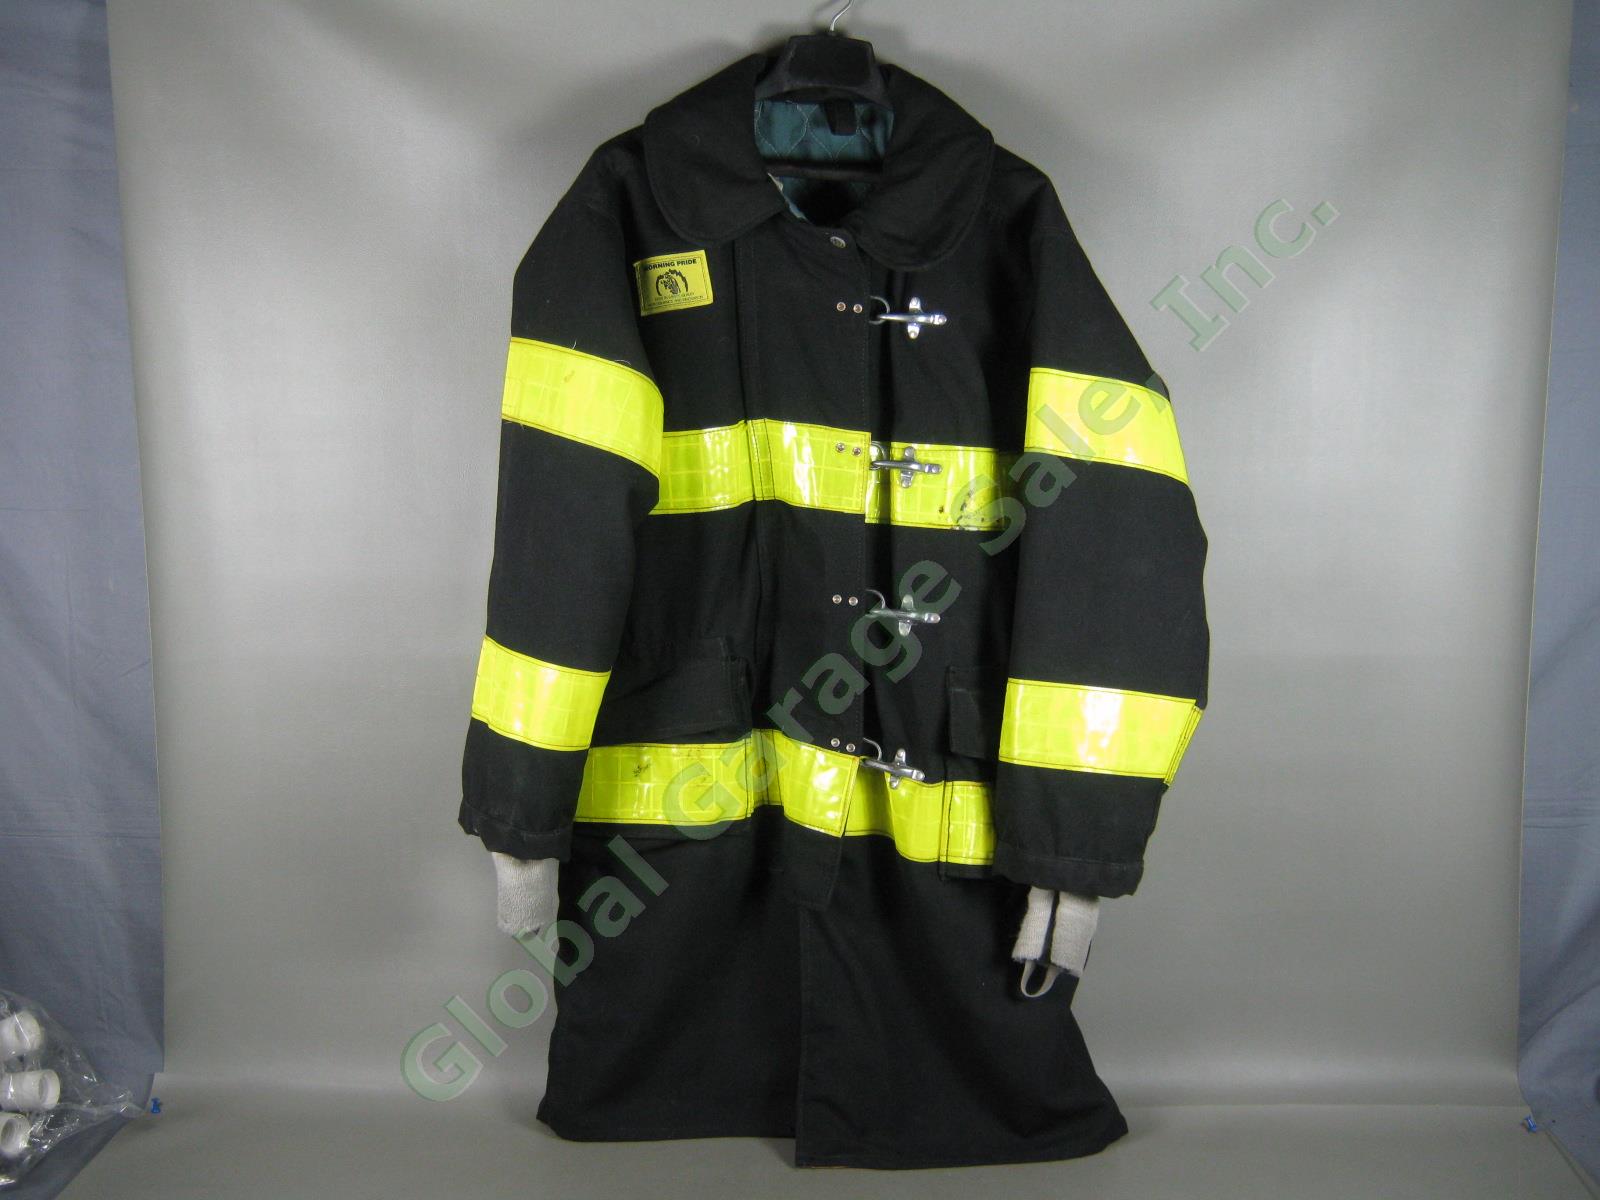 Morning Pride FDNY NY NYC Fire Dept Summer Firefighter Turnout Jacket 44 EXC!!